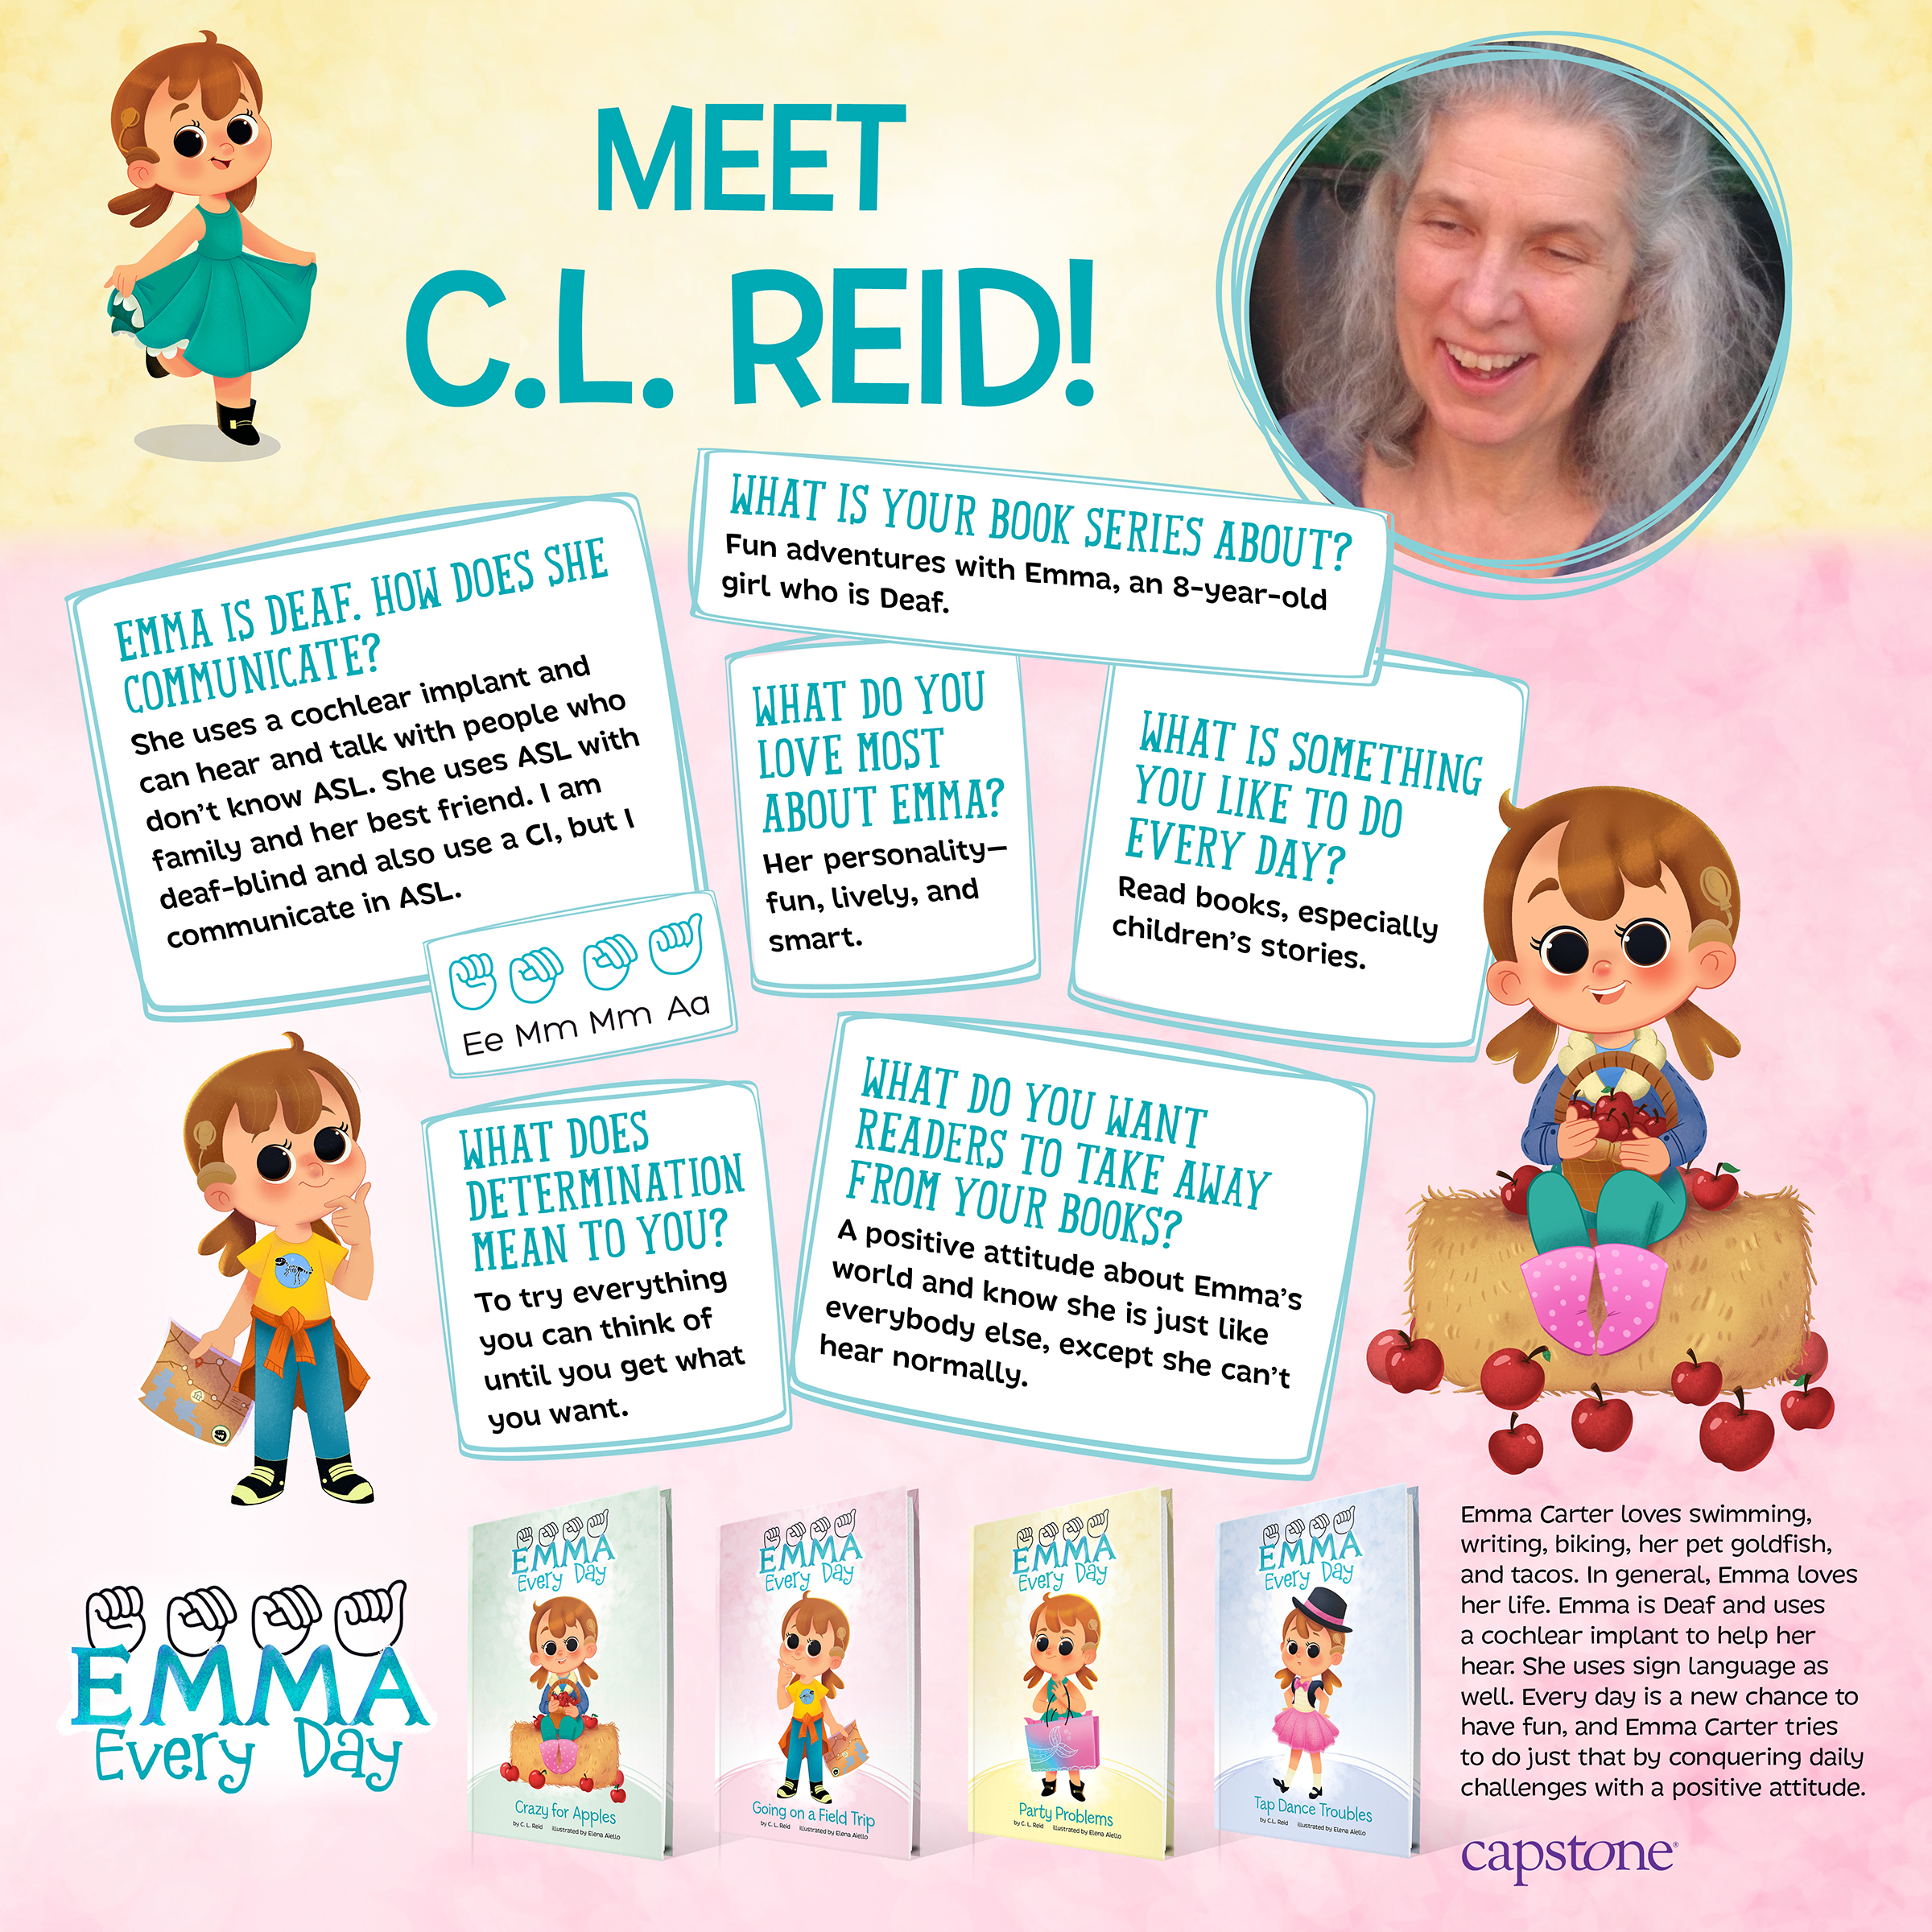 Image of author question and answer with C.L. Reid about her new children's book series Emma Every Day